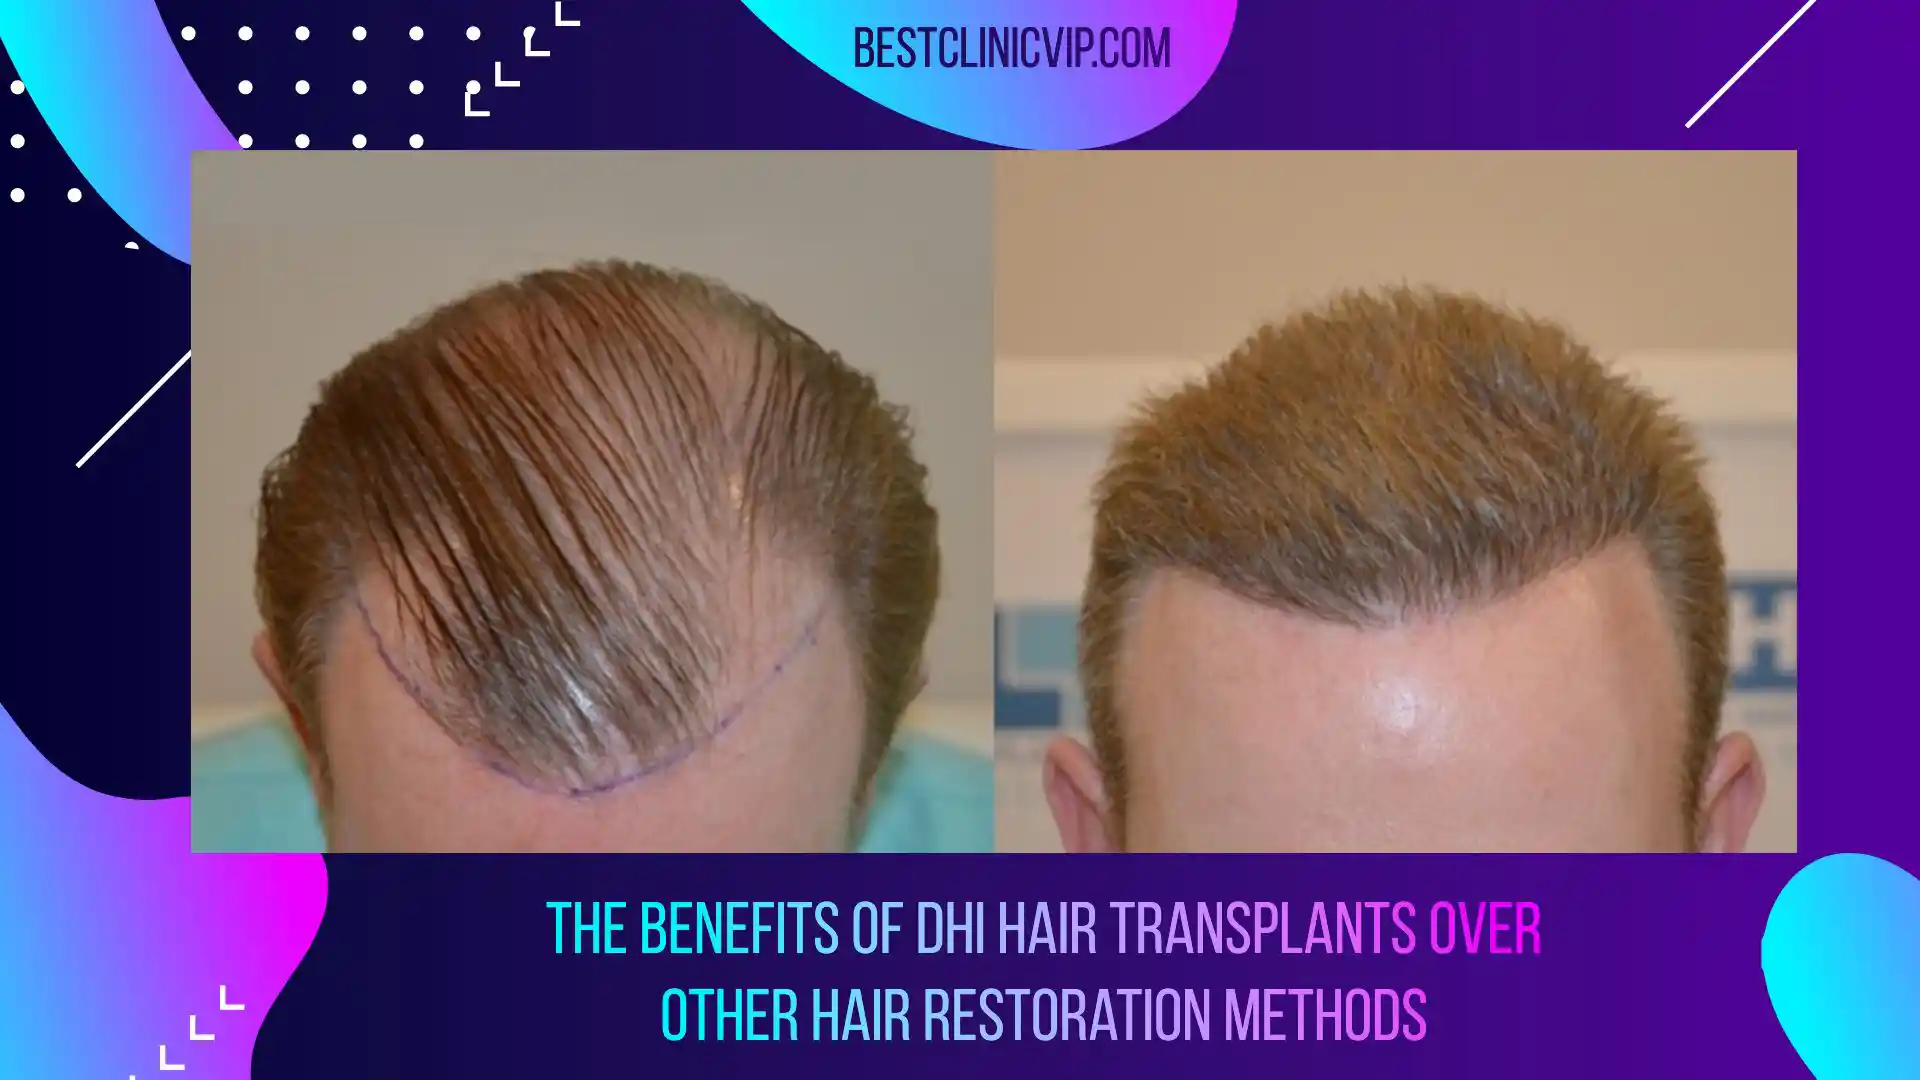 The benefits of DHI hair transplants over other hair restoration methods